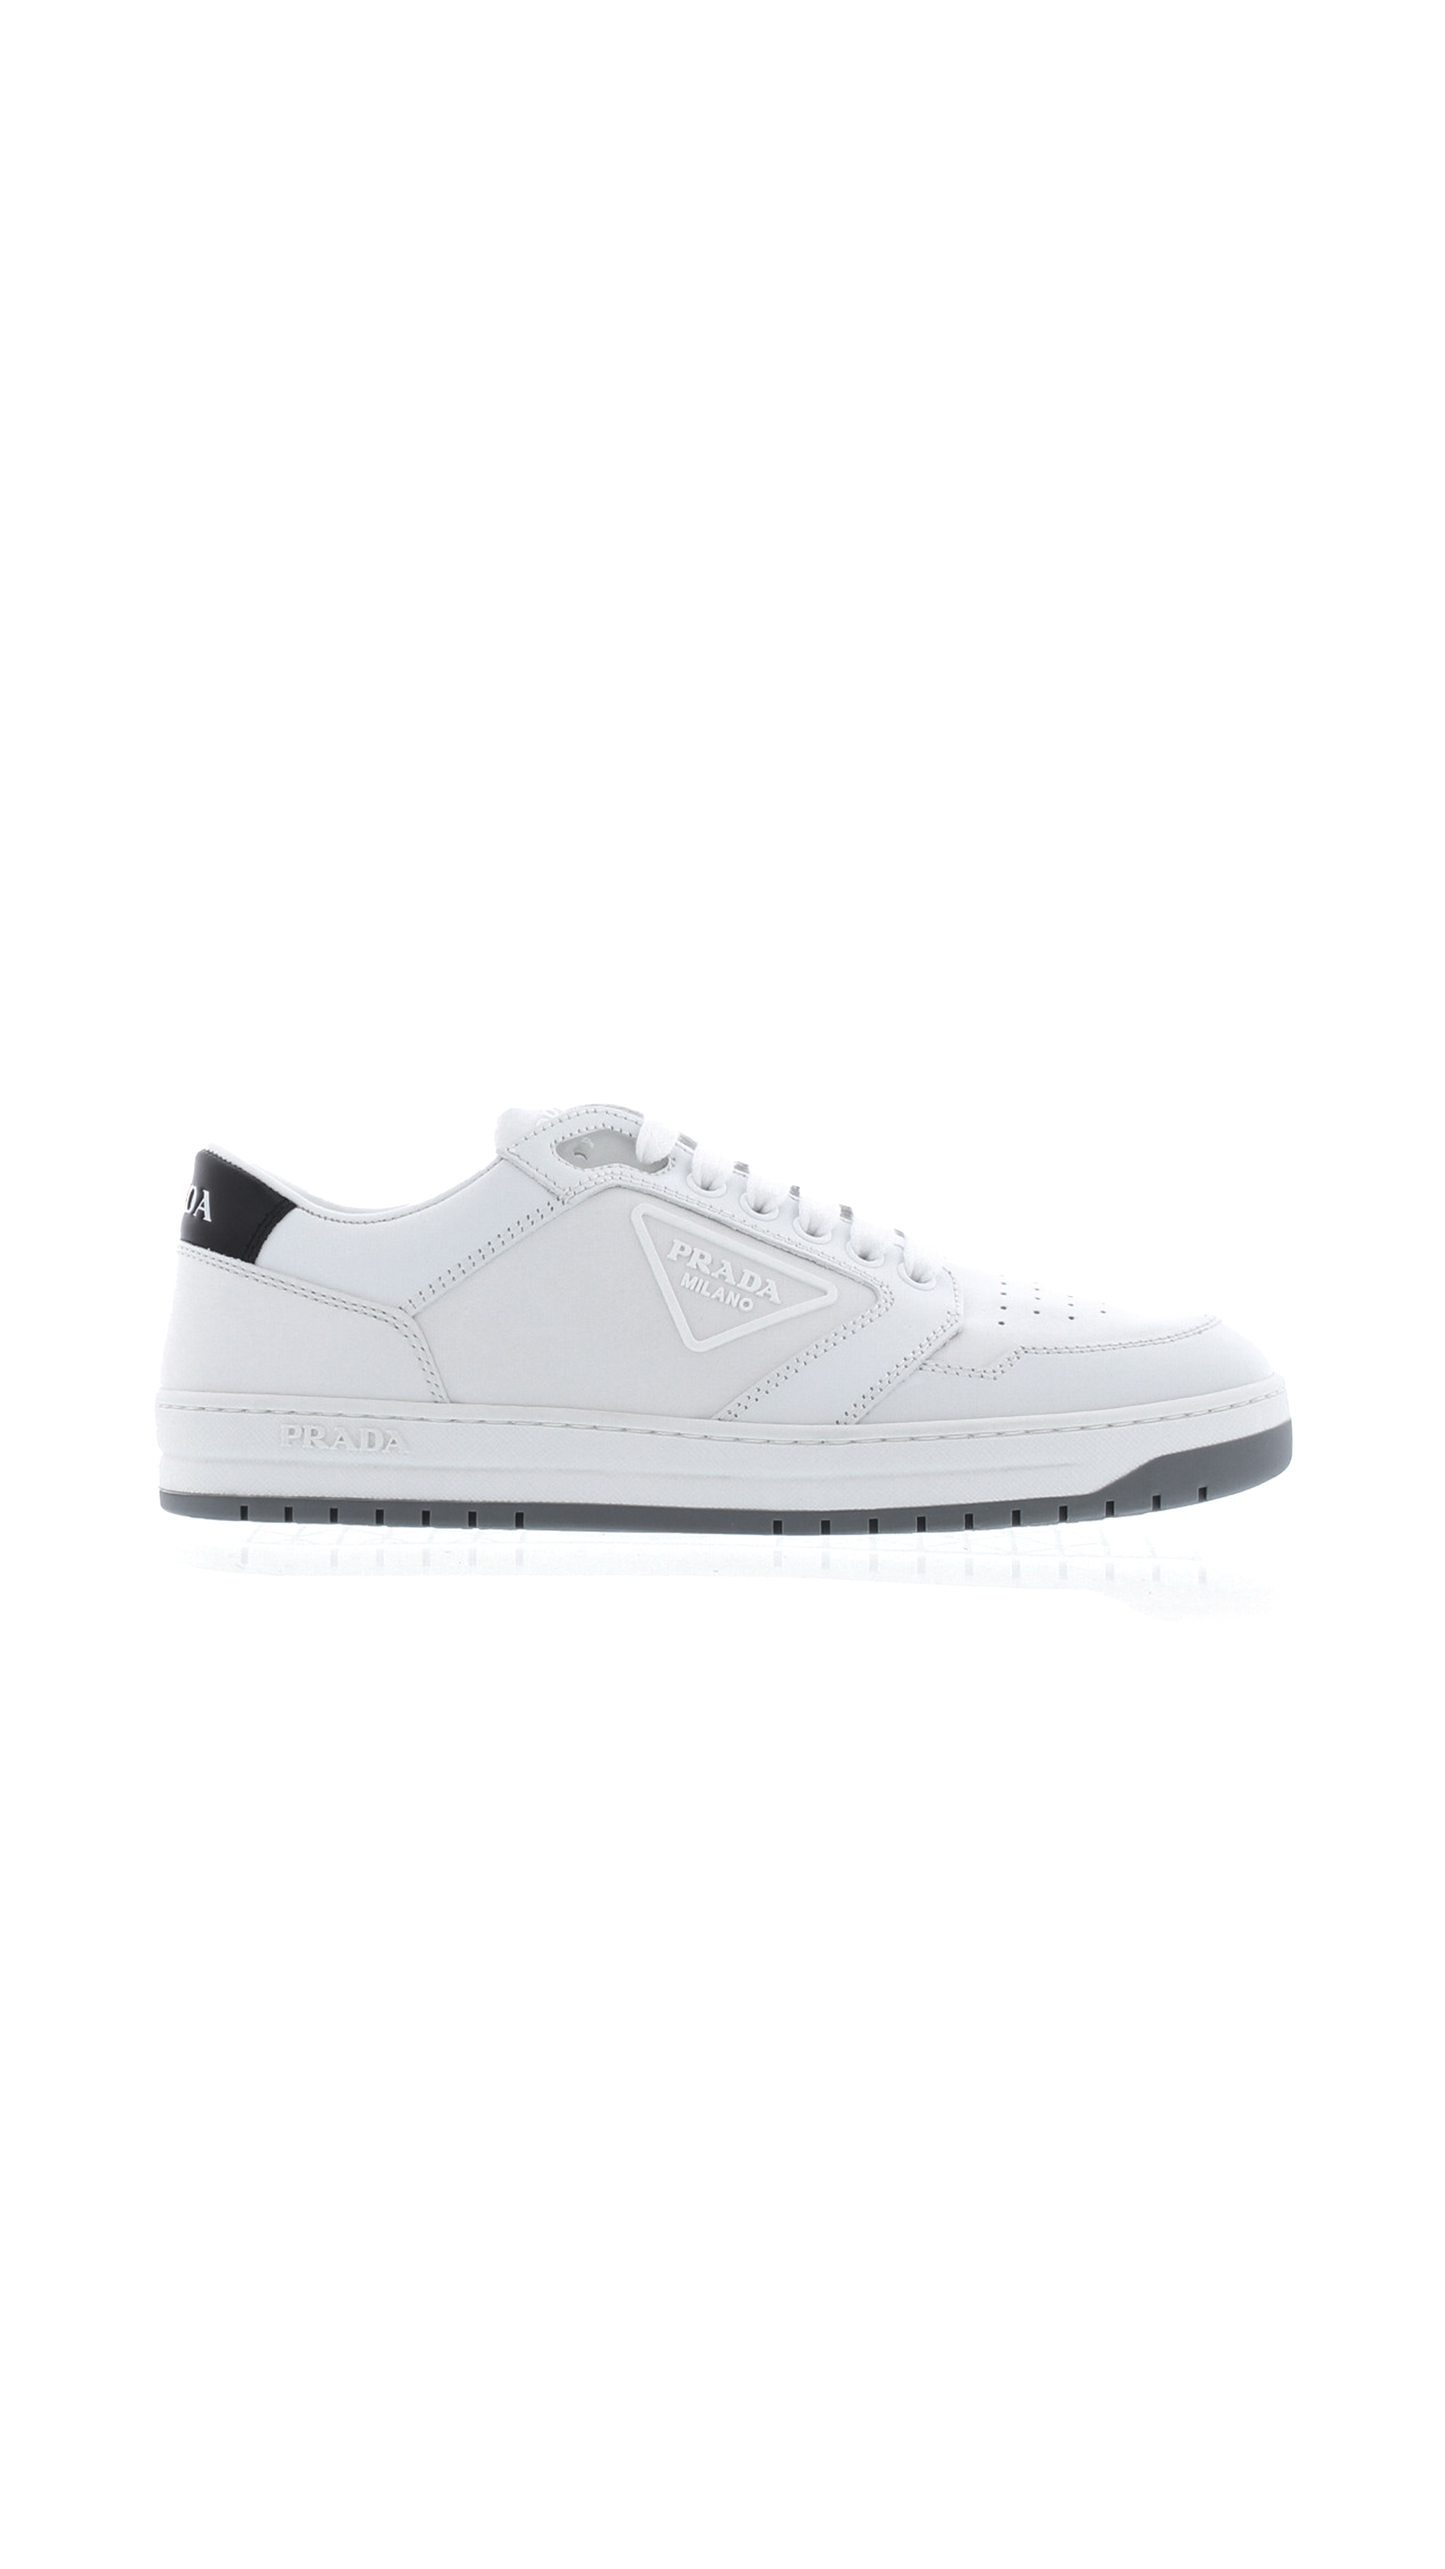 District Leather Sneaker - White